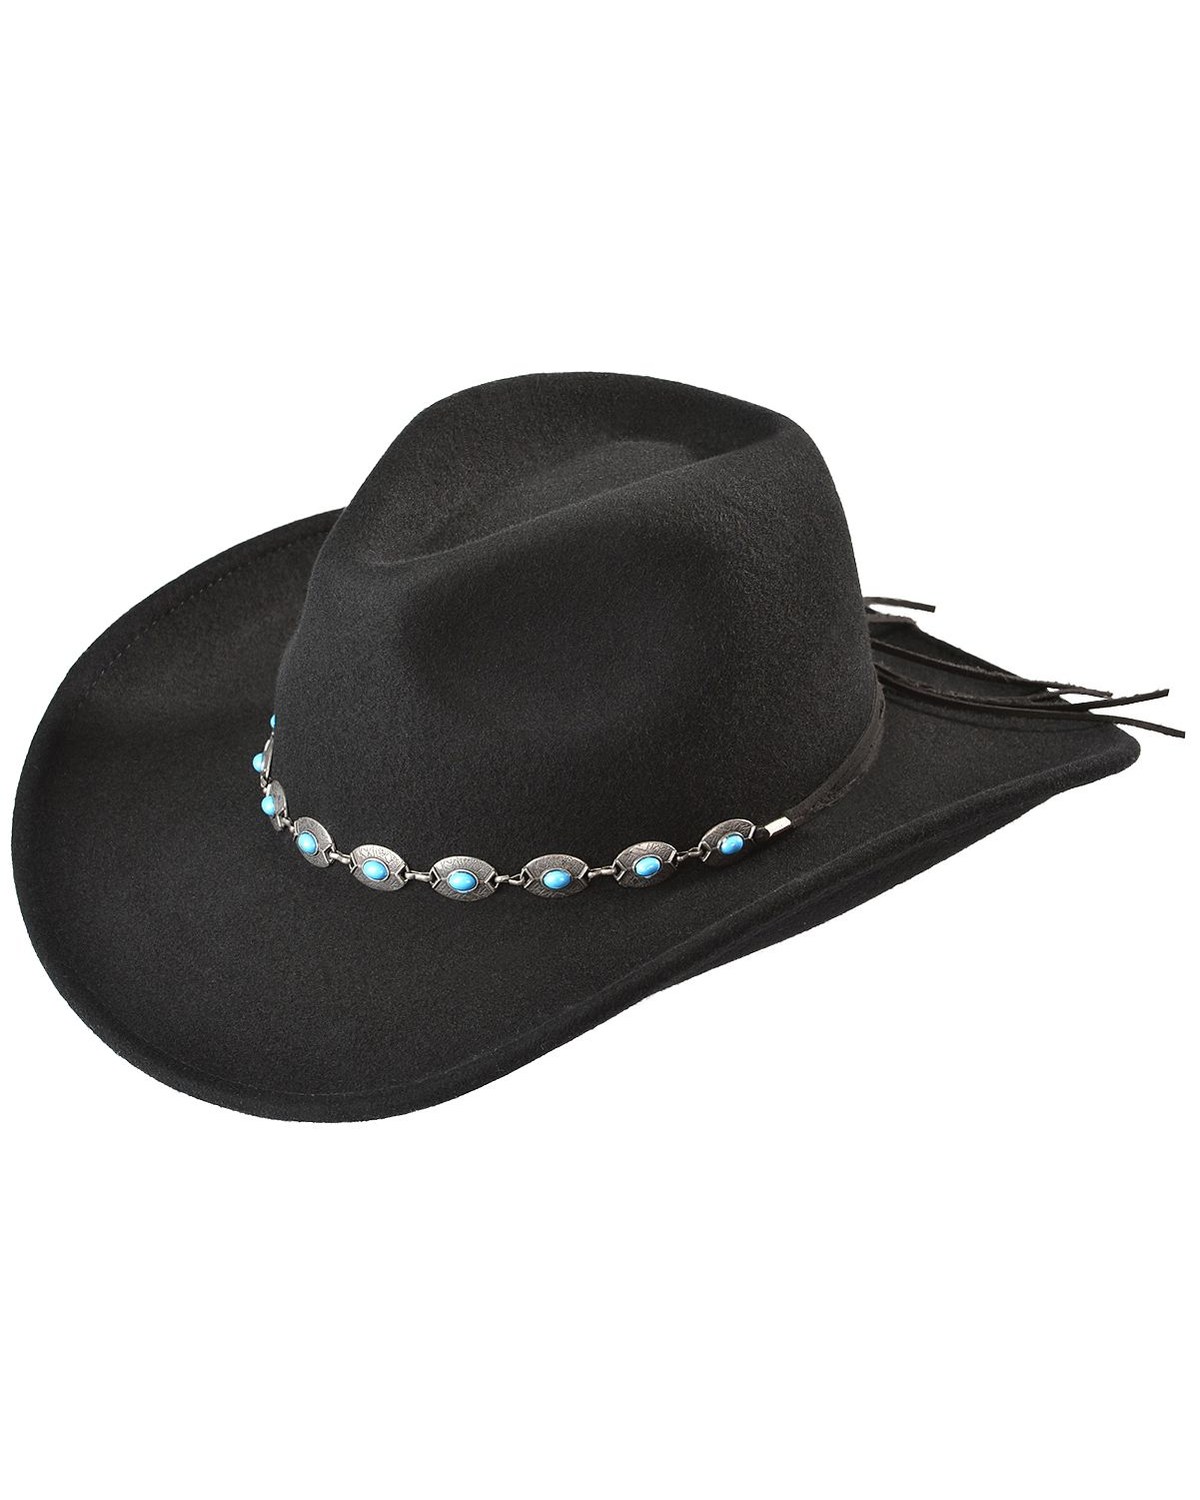 Outback Trading Co. Silverton UPF 50 Sun Protection Crushable Felt Hat